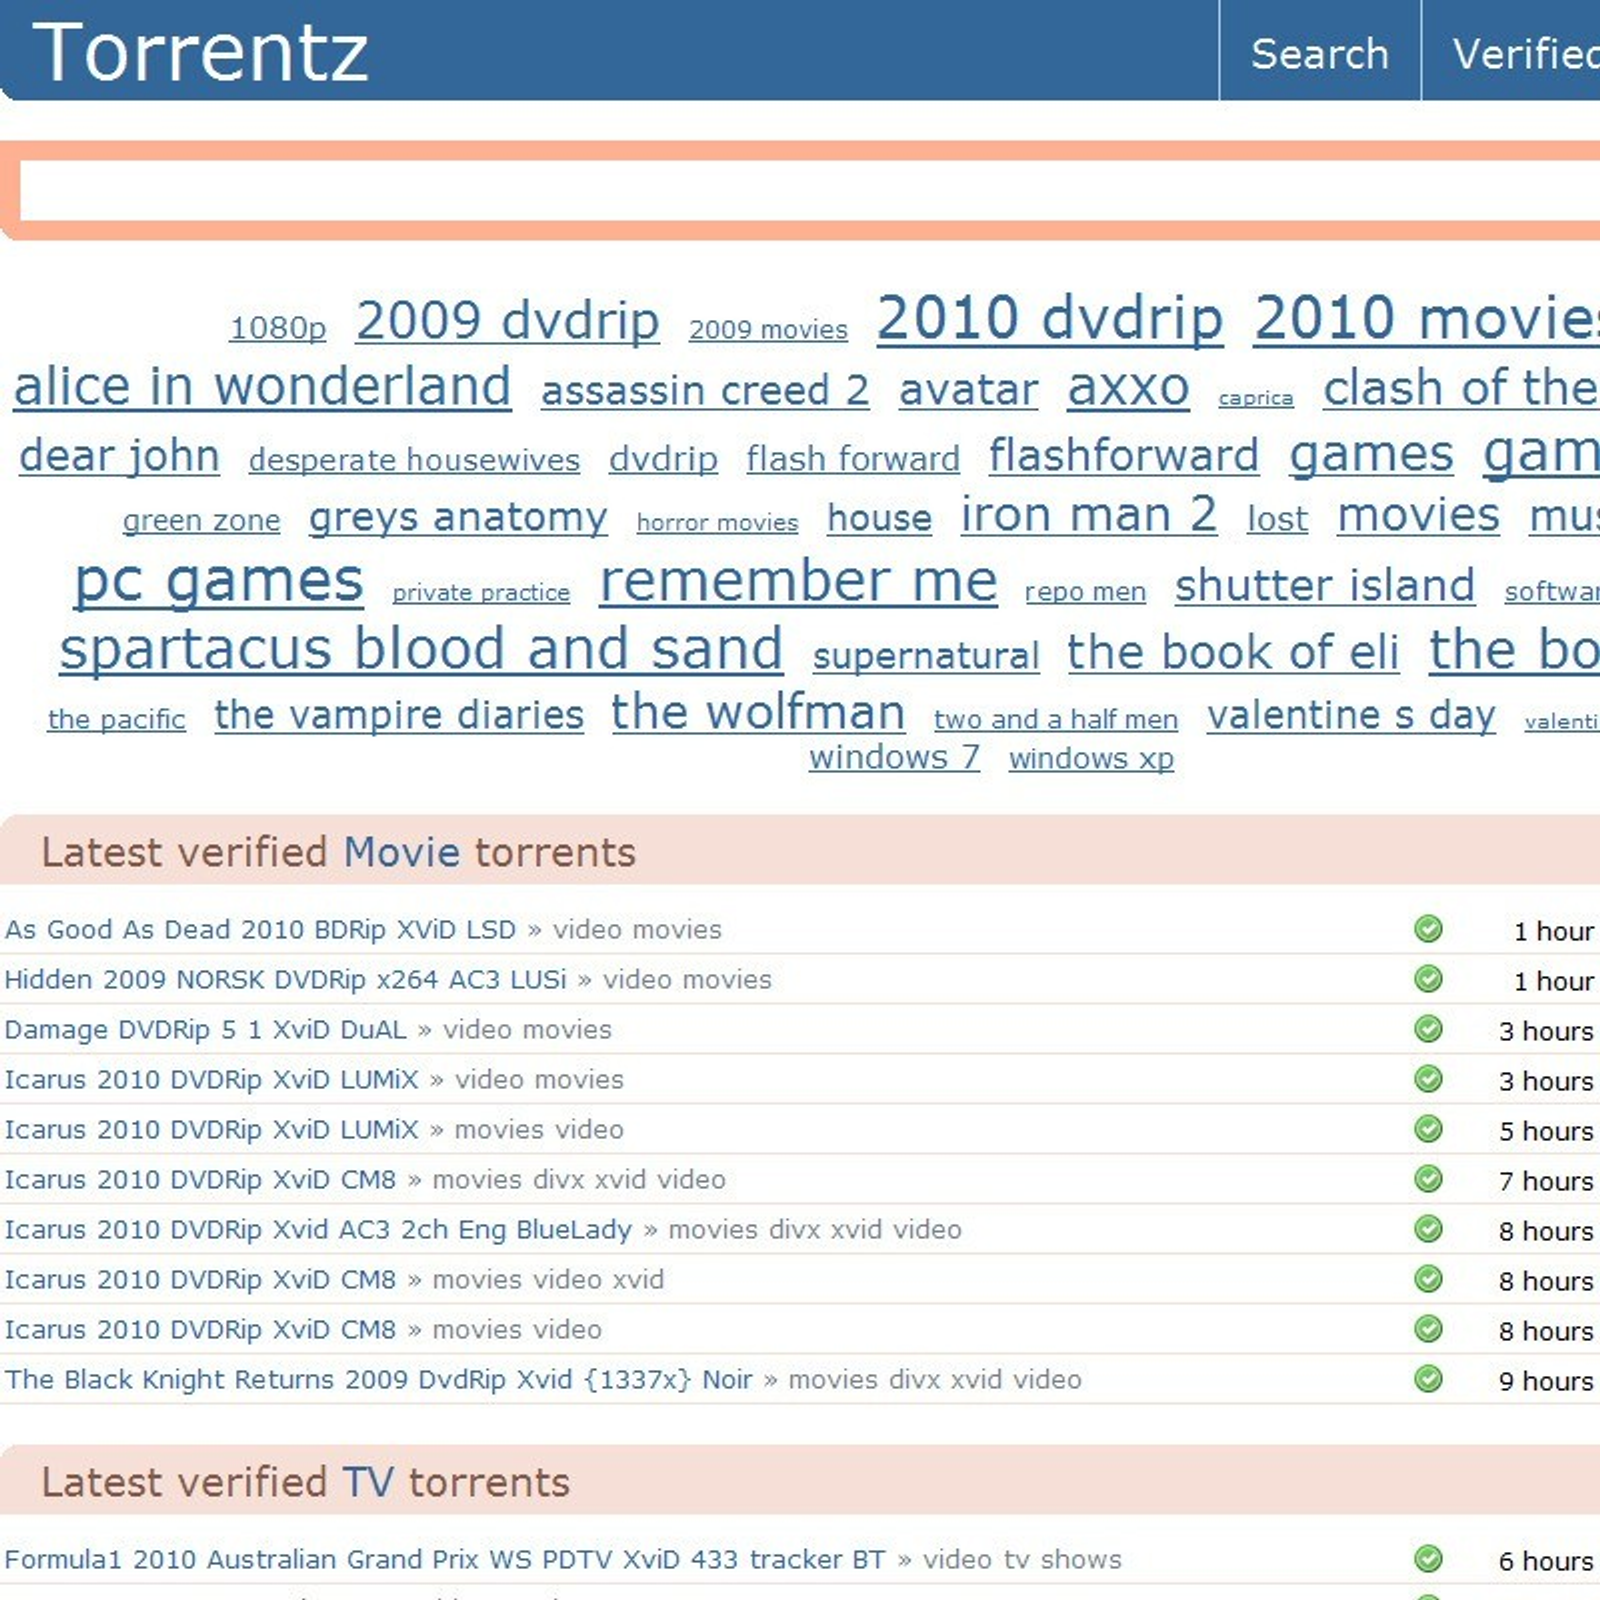 how to add an exception for website torrentz.eu to adguard